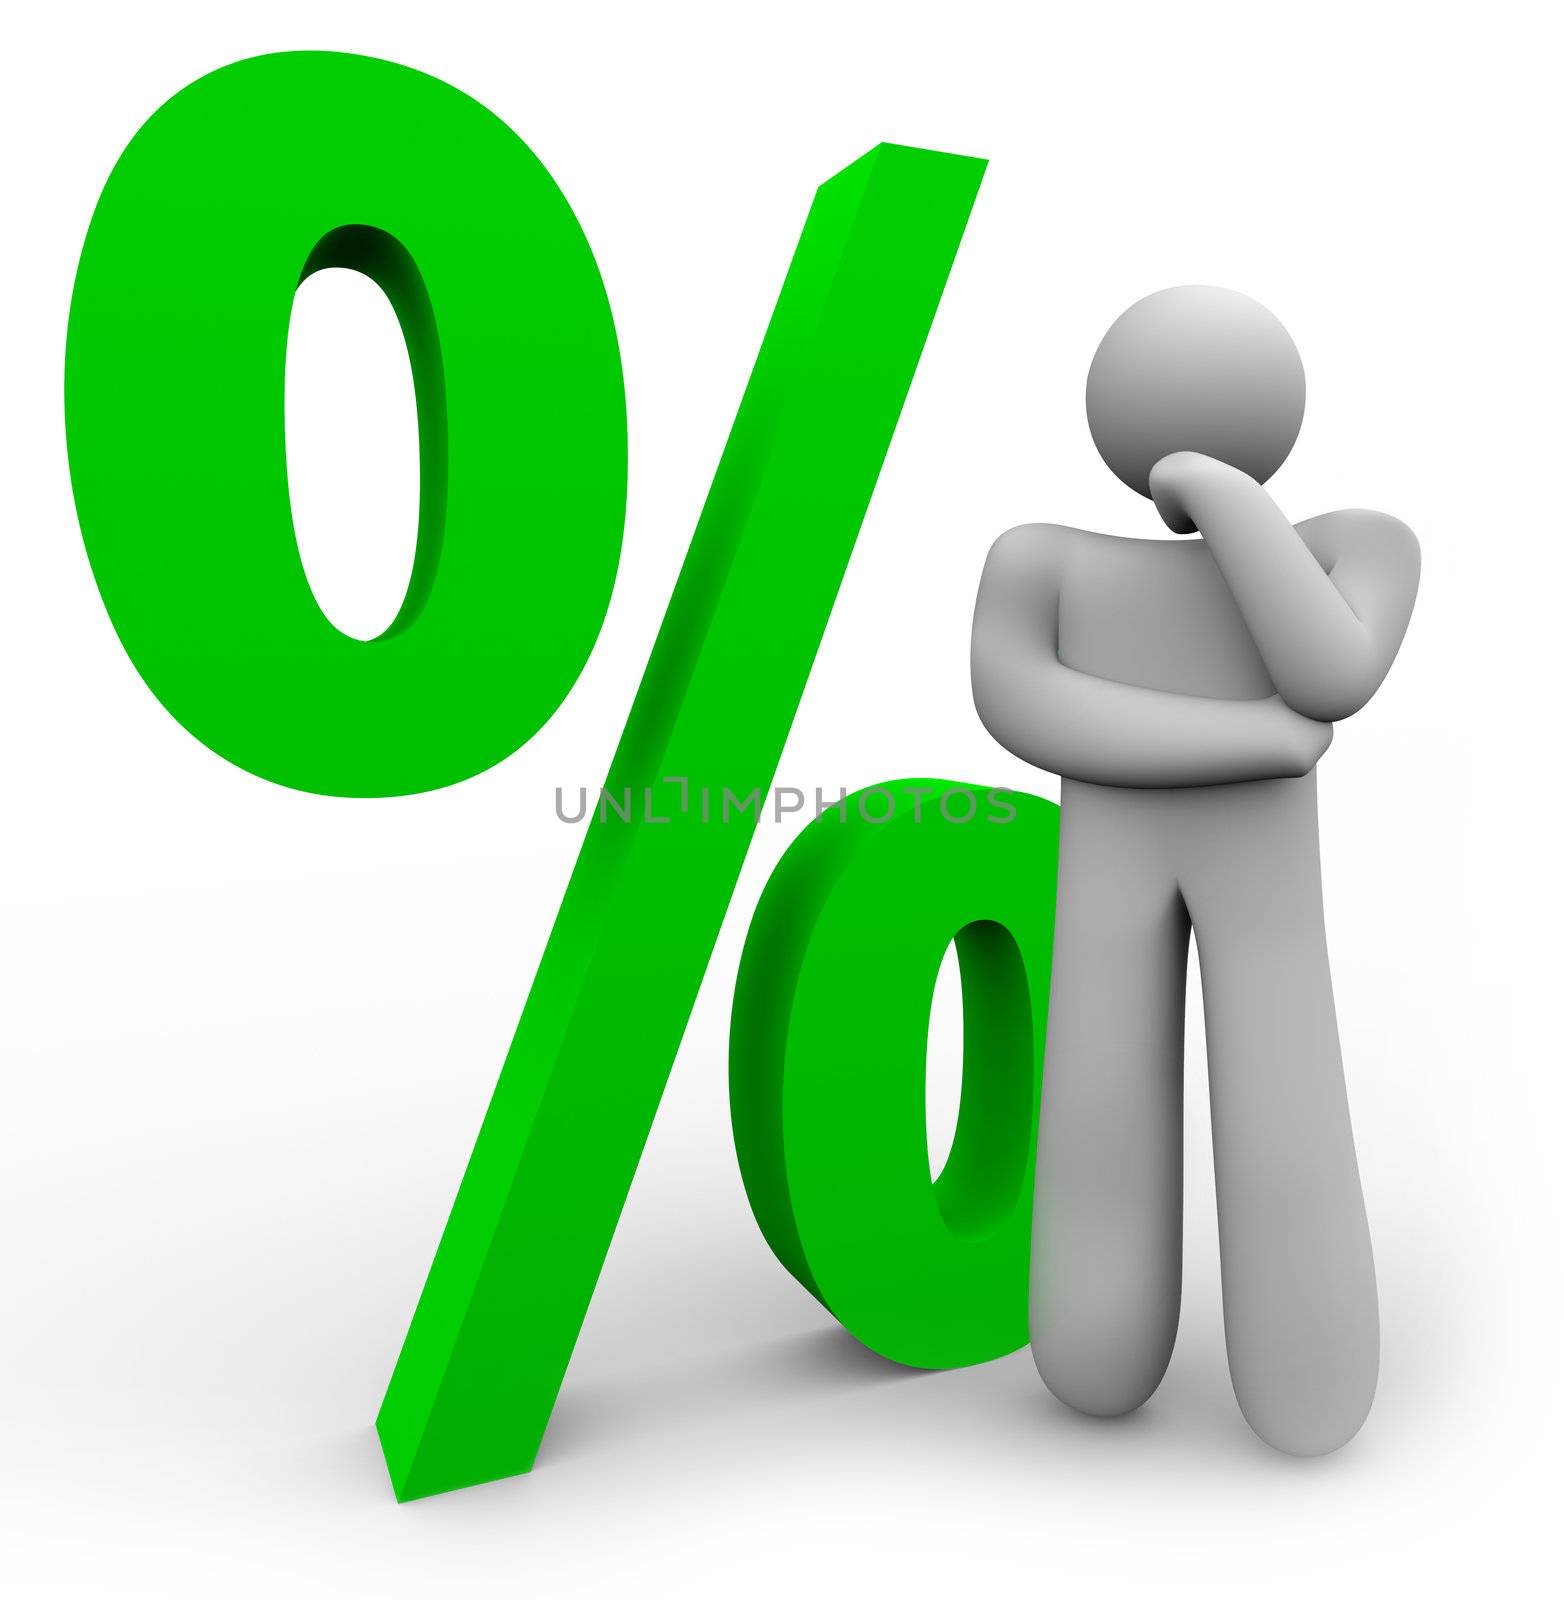 A man is thinking in front of a green percentage symbol, representing the comparison between different interest rates or statistics